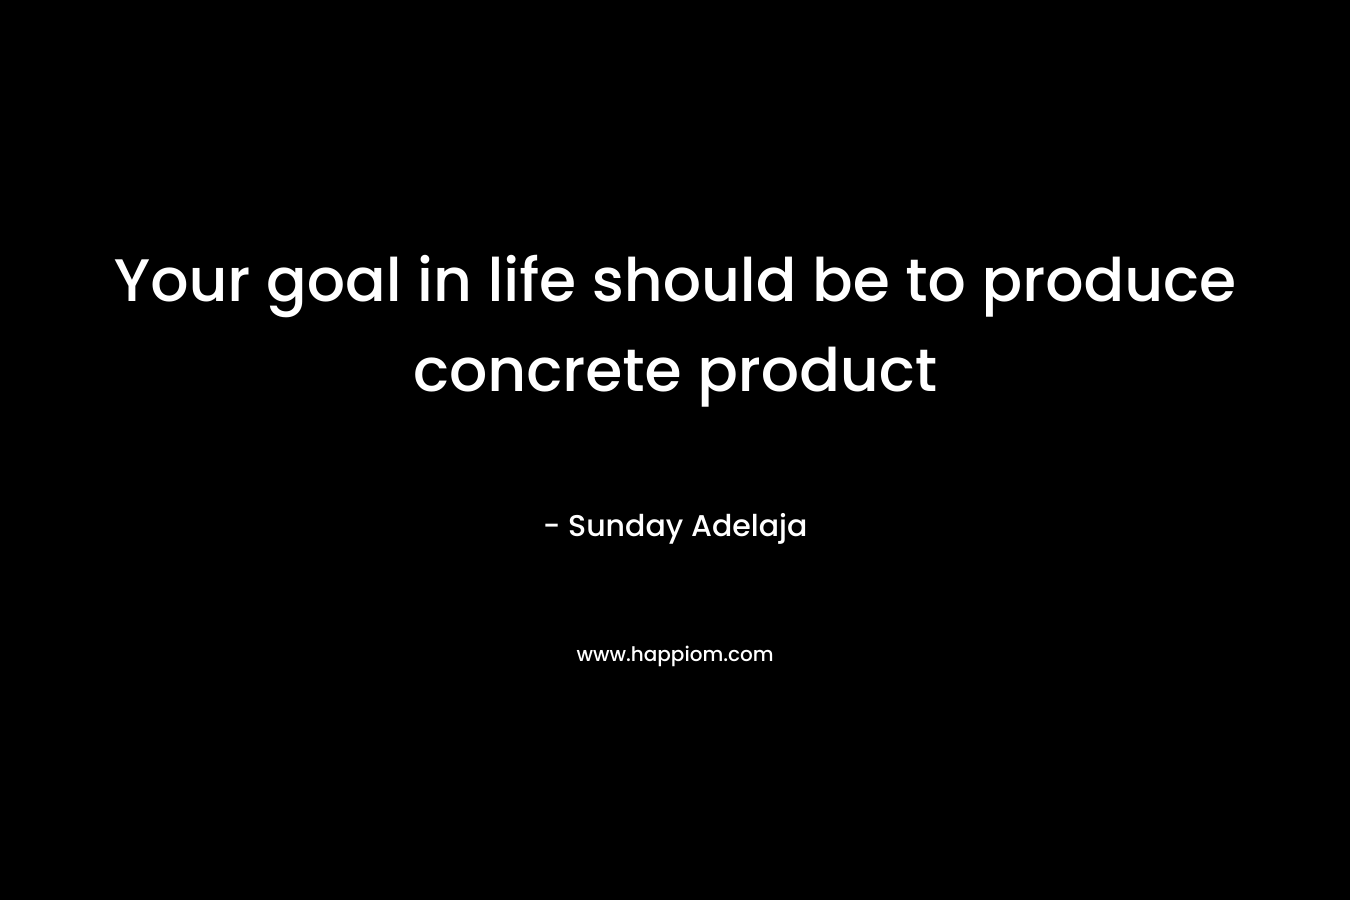 Your goal in life should be to produce concrete product